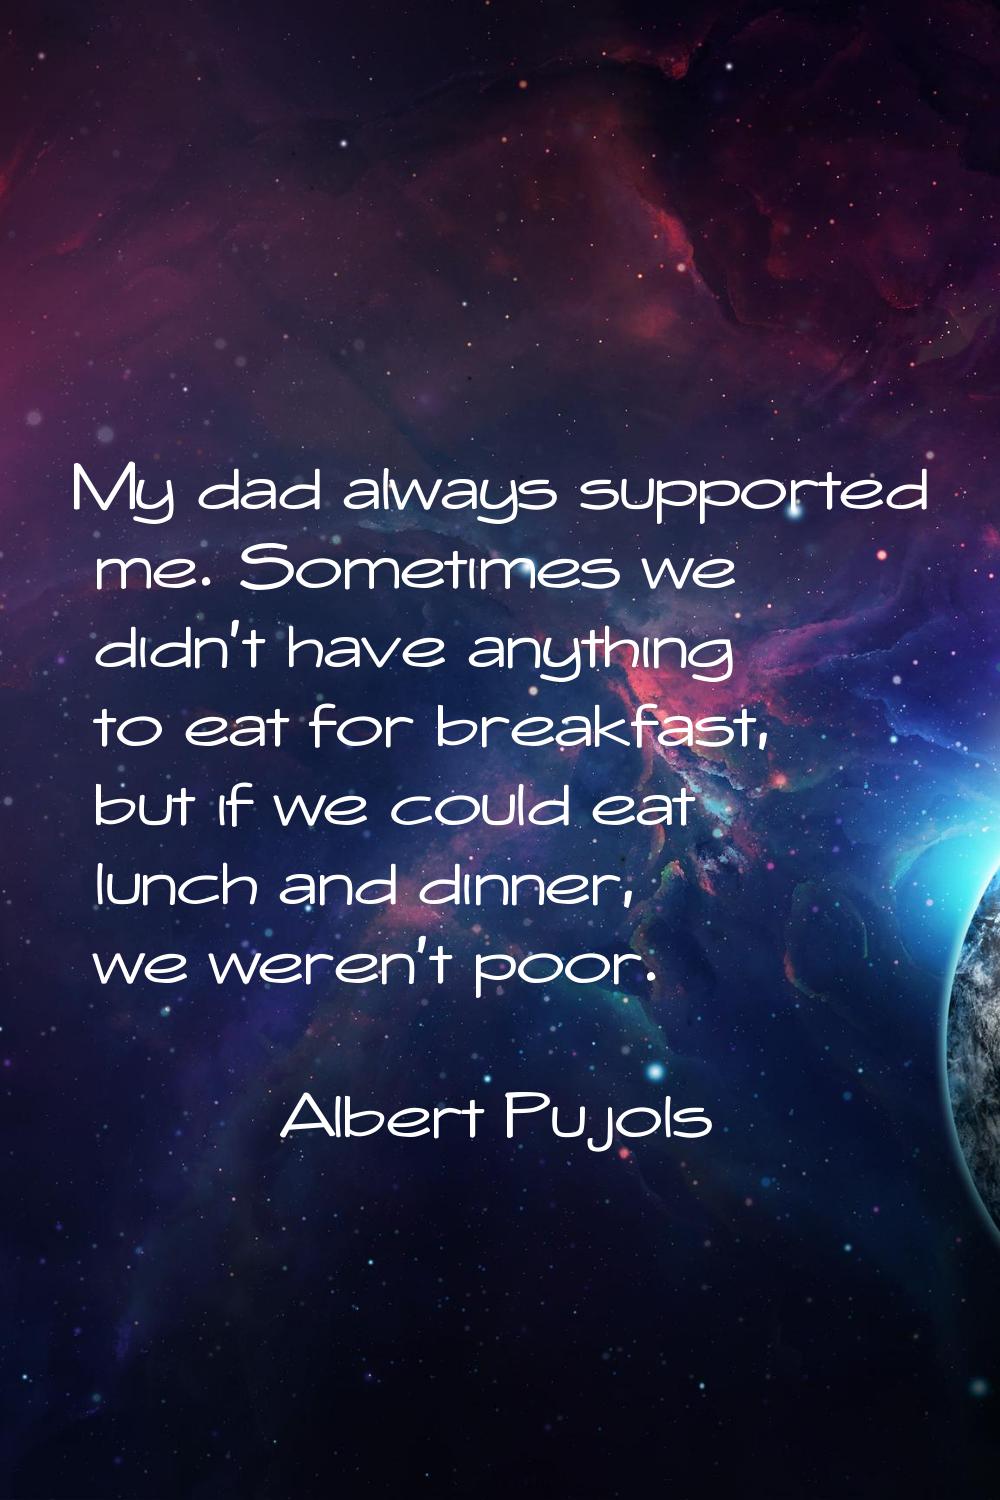 My dad always supported me. Sometimes we didn't have anything to eat for breakfast, but if we could